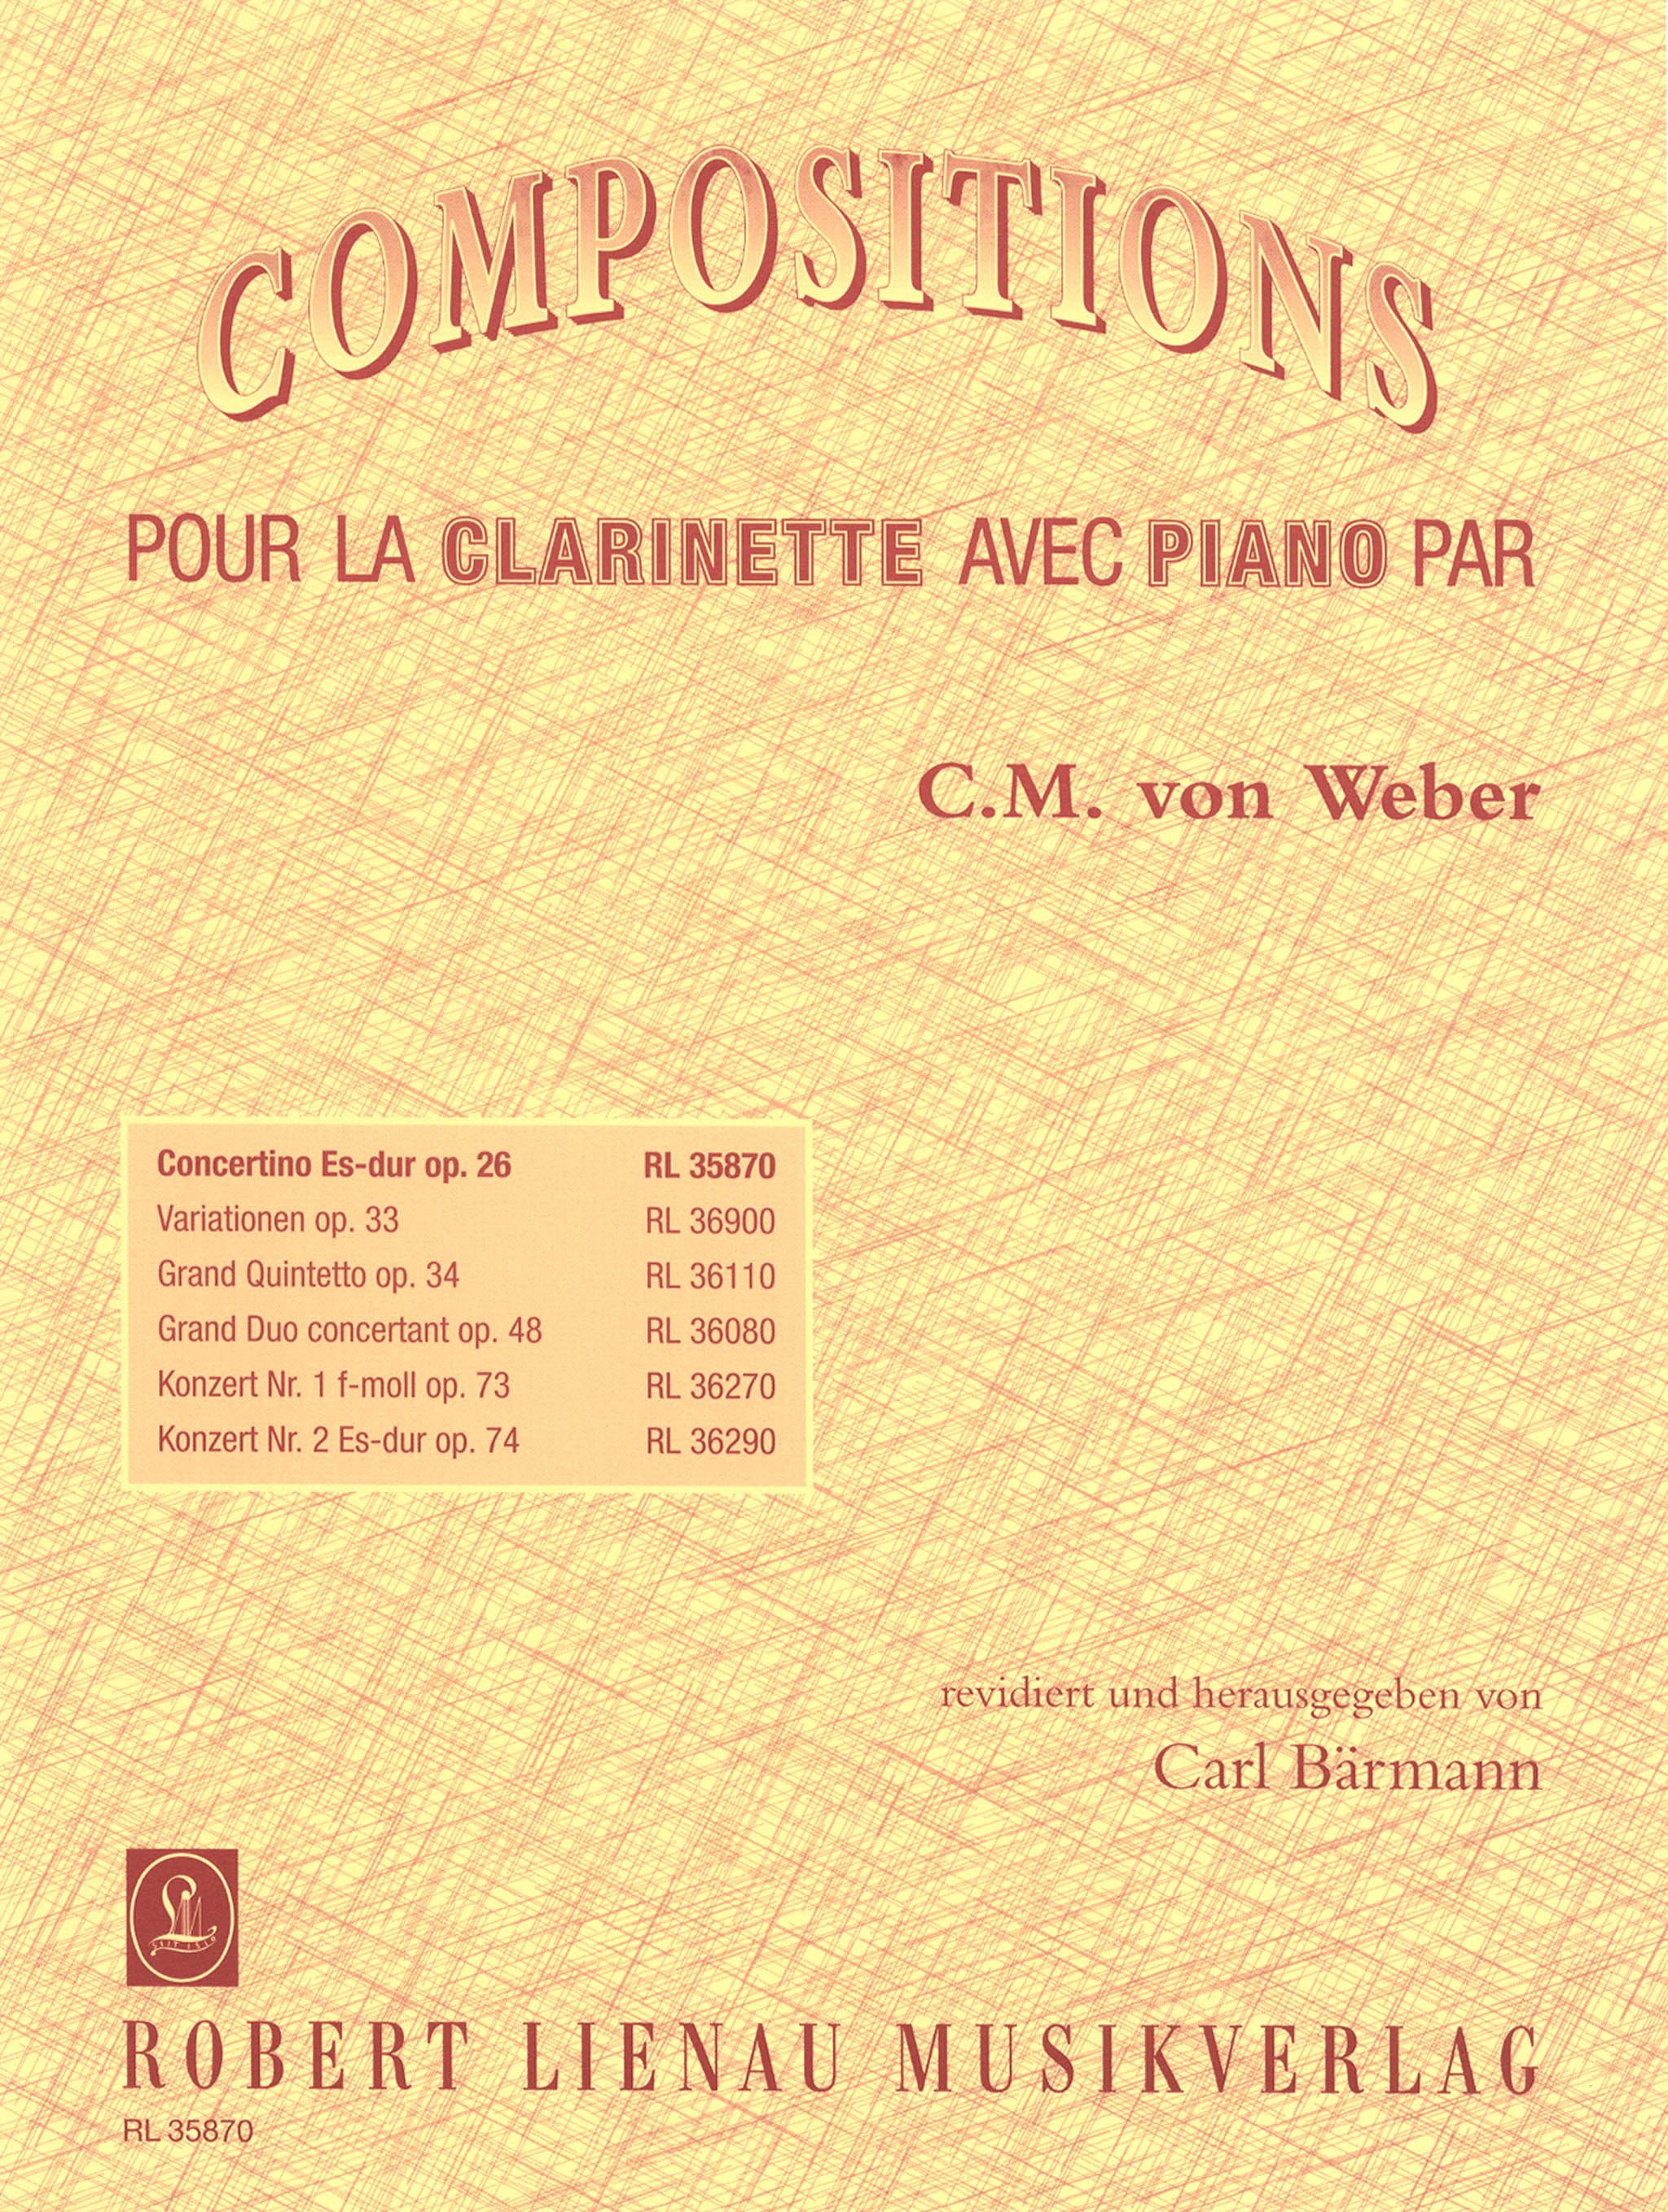 Concertino in E-flat Major, Op. 26 Cover